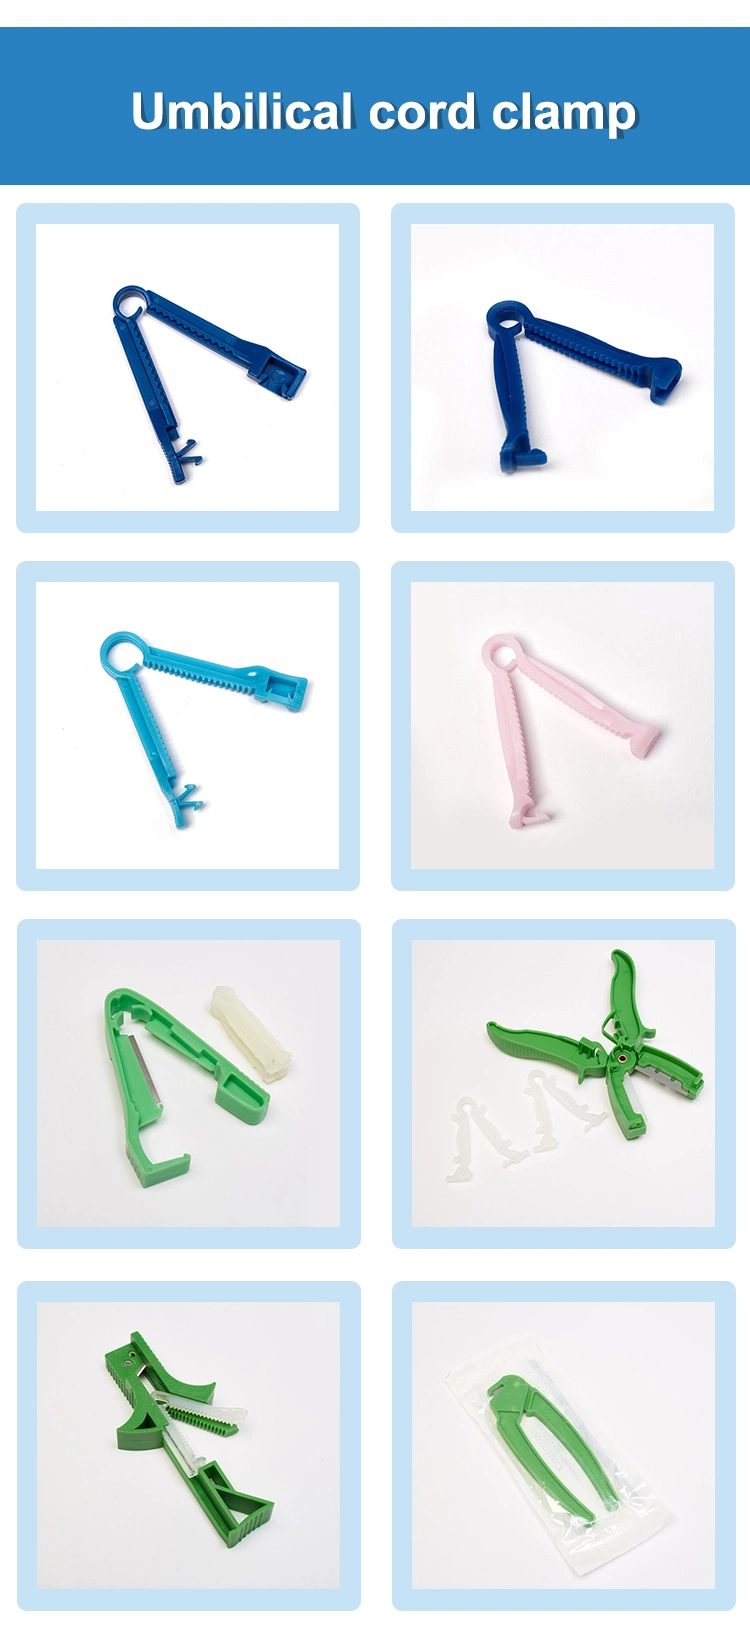 Disposable Medical Sterile Umbilical Cord Clamp Cutter